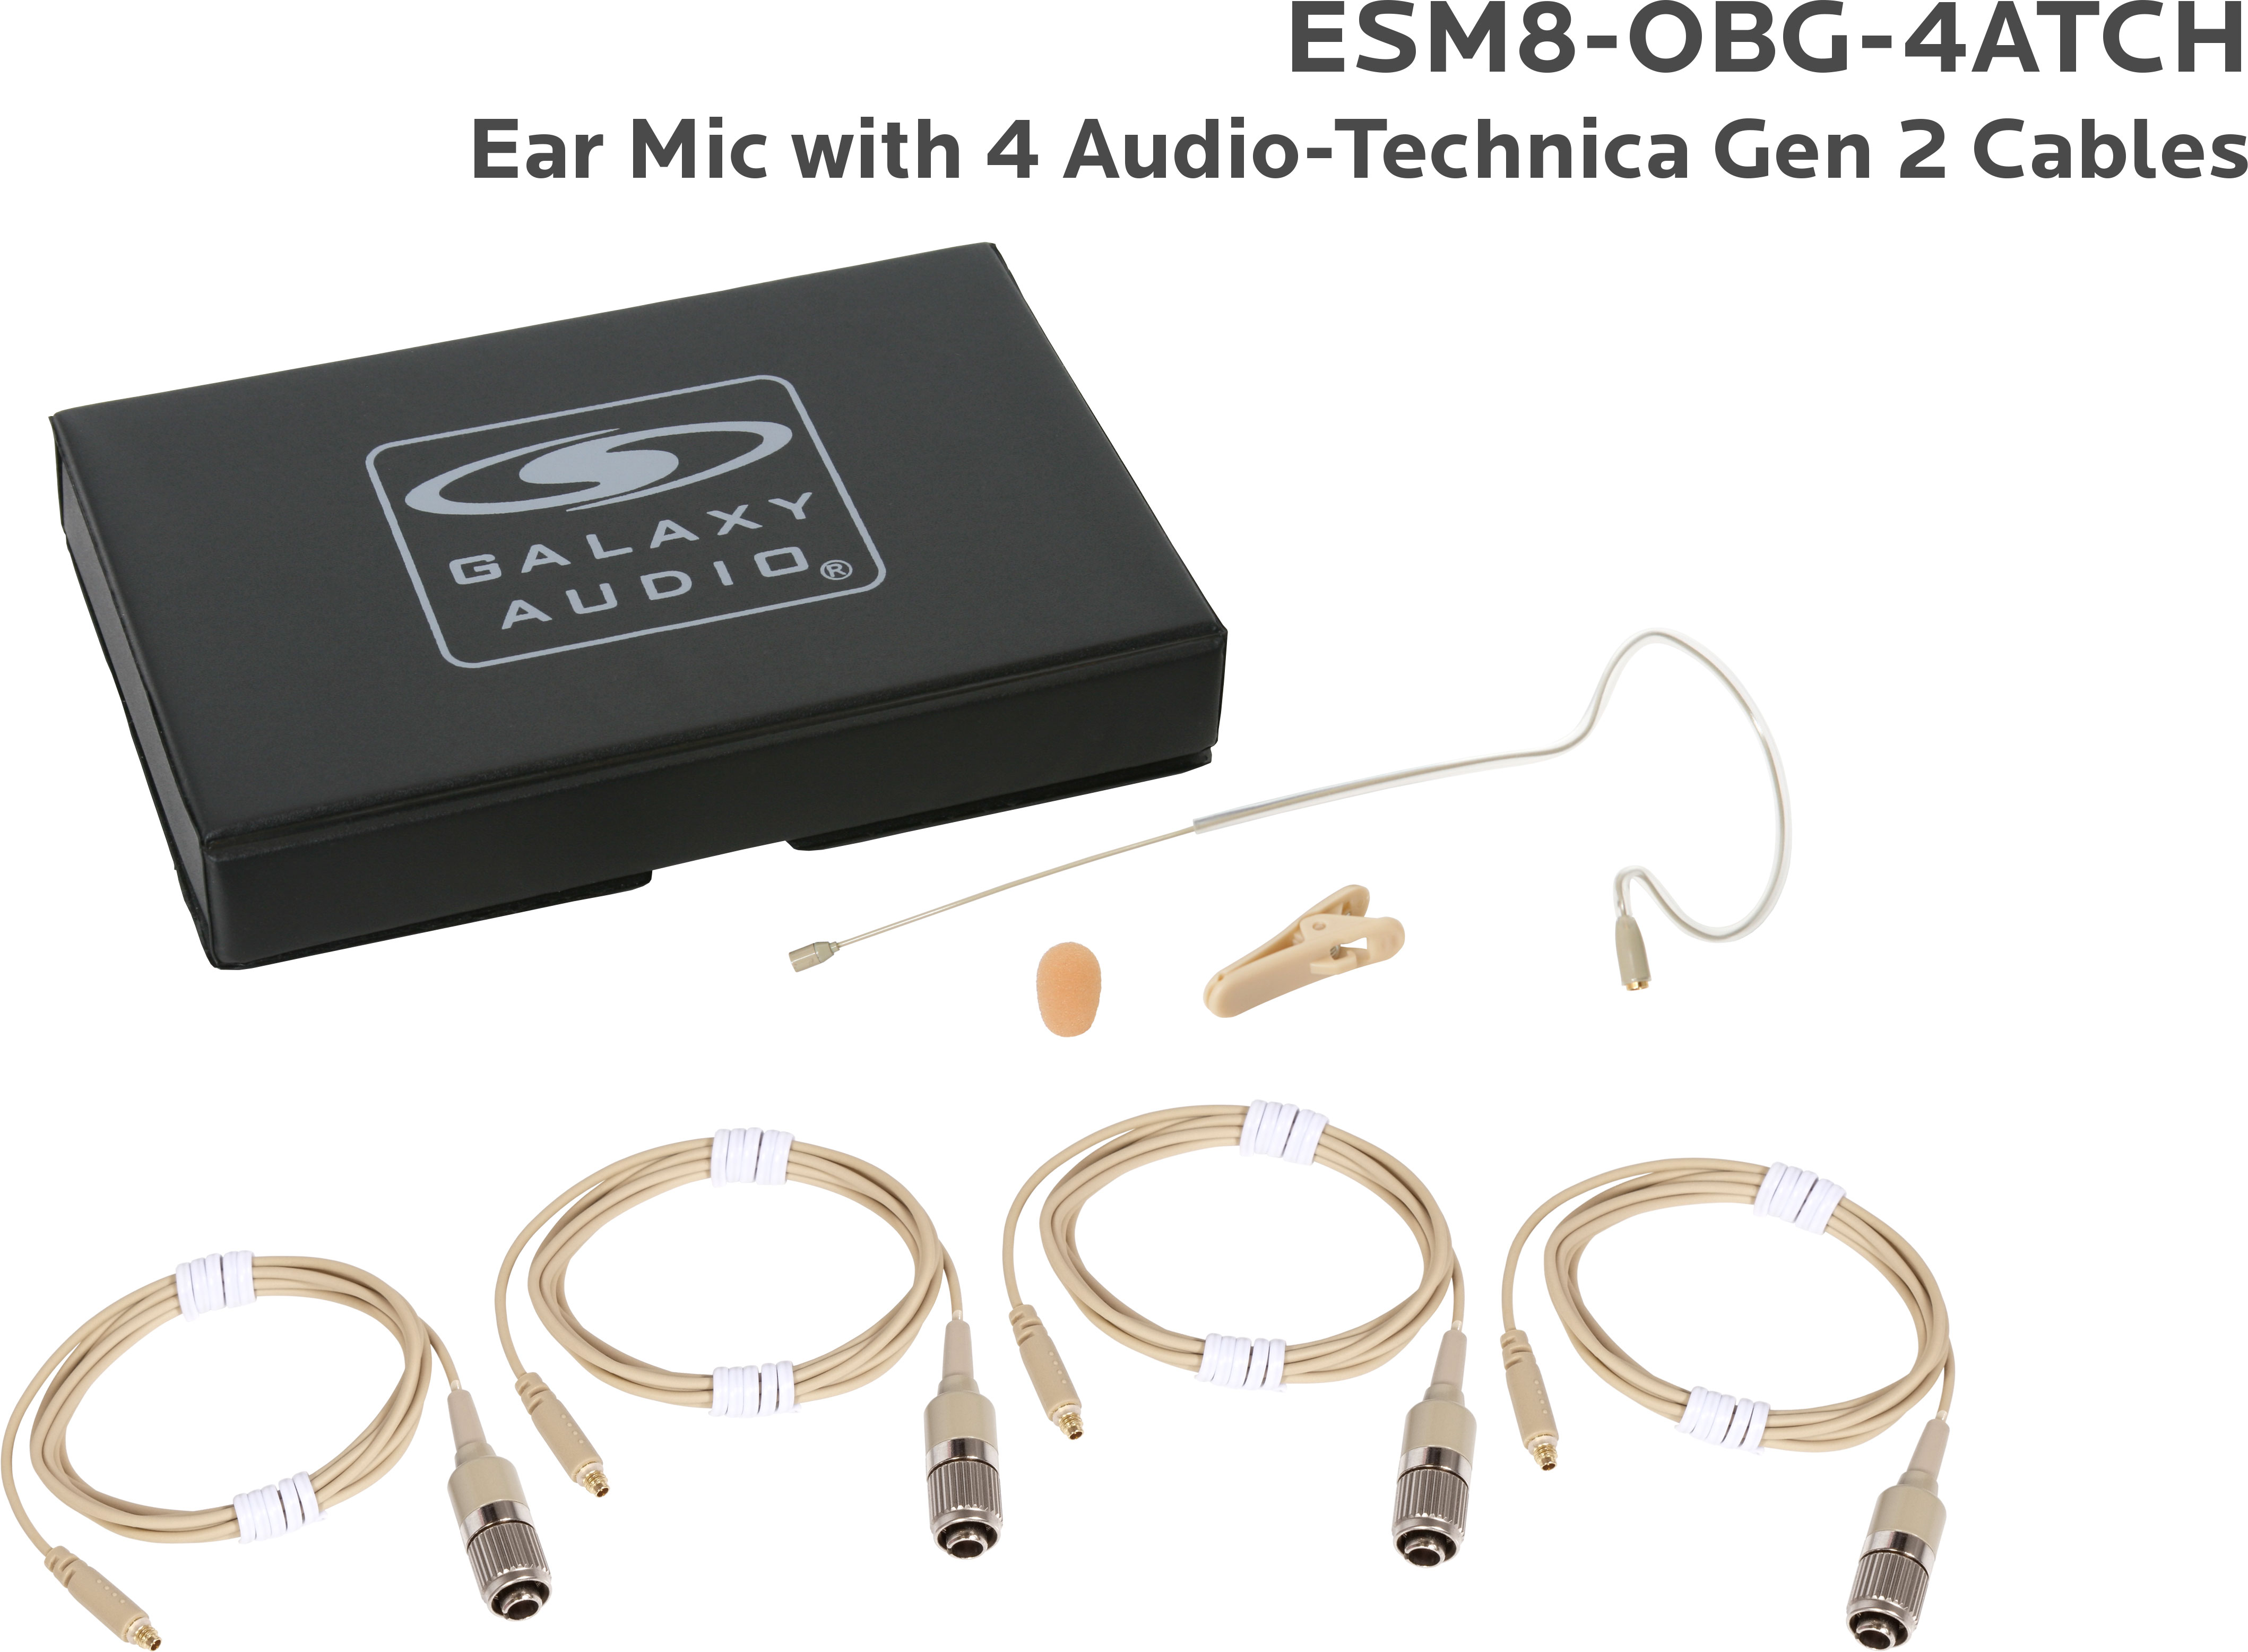 Galaxy Audio ESM8 | Over the Ear Microphone Headset